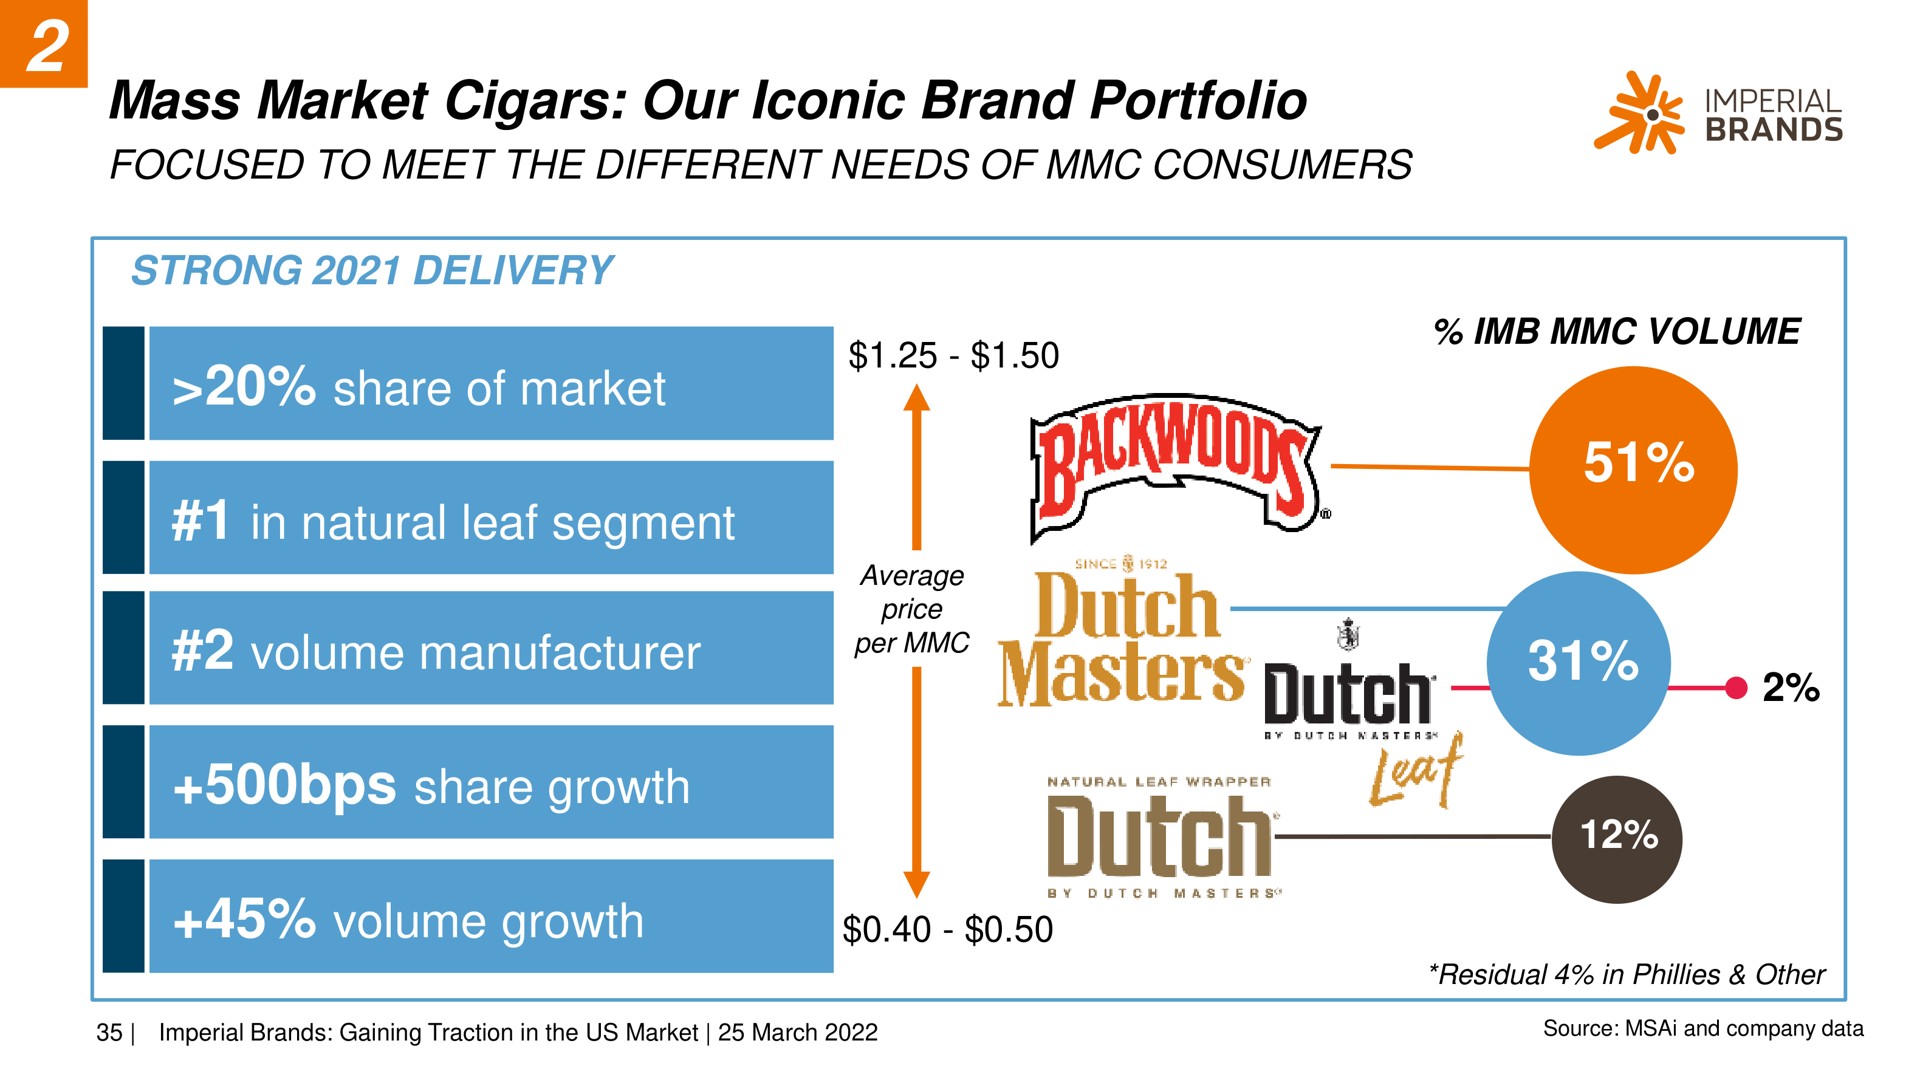 mass market cigars our iconic brand portfolio share of market in natural leaf segment volume manufacturer share growth volume growth focused to meet the different needs consumers imperial dutch | Imperial Brands